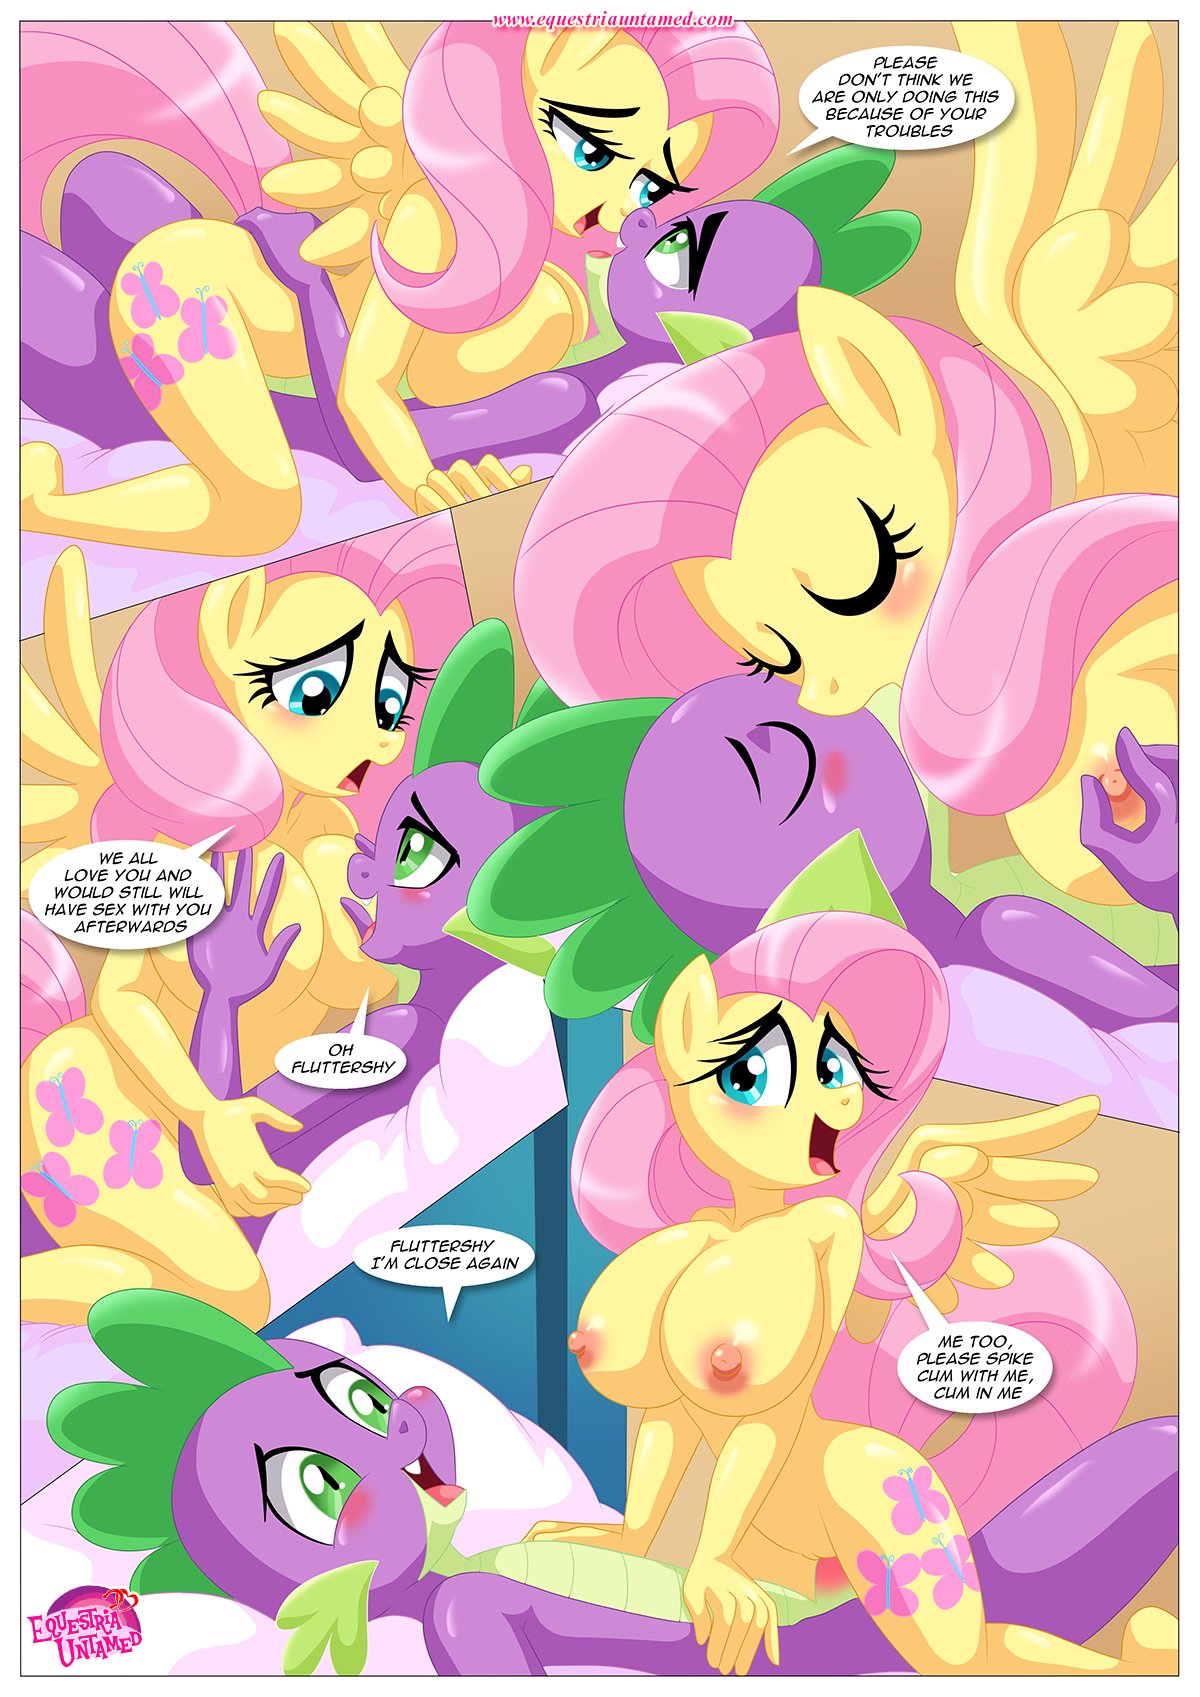 bbmbbf comic equestria_untamed fluttershy fluttershy_(mlp) friendship_is_magic my_little_pony palcomix spike spike_(mlp) the_secret_ingredient_is_fluttershy..._fluttershy!